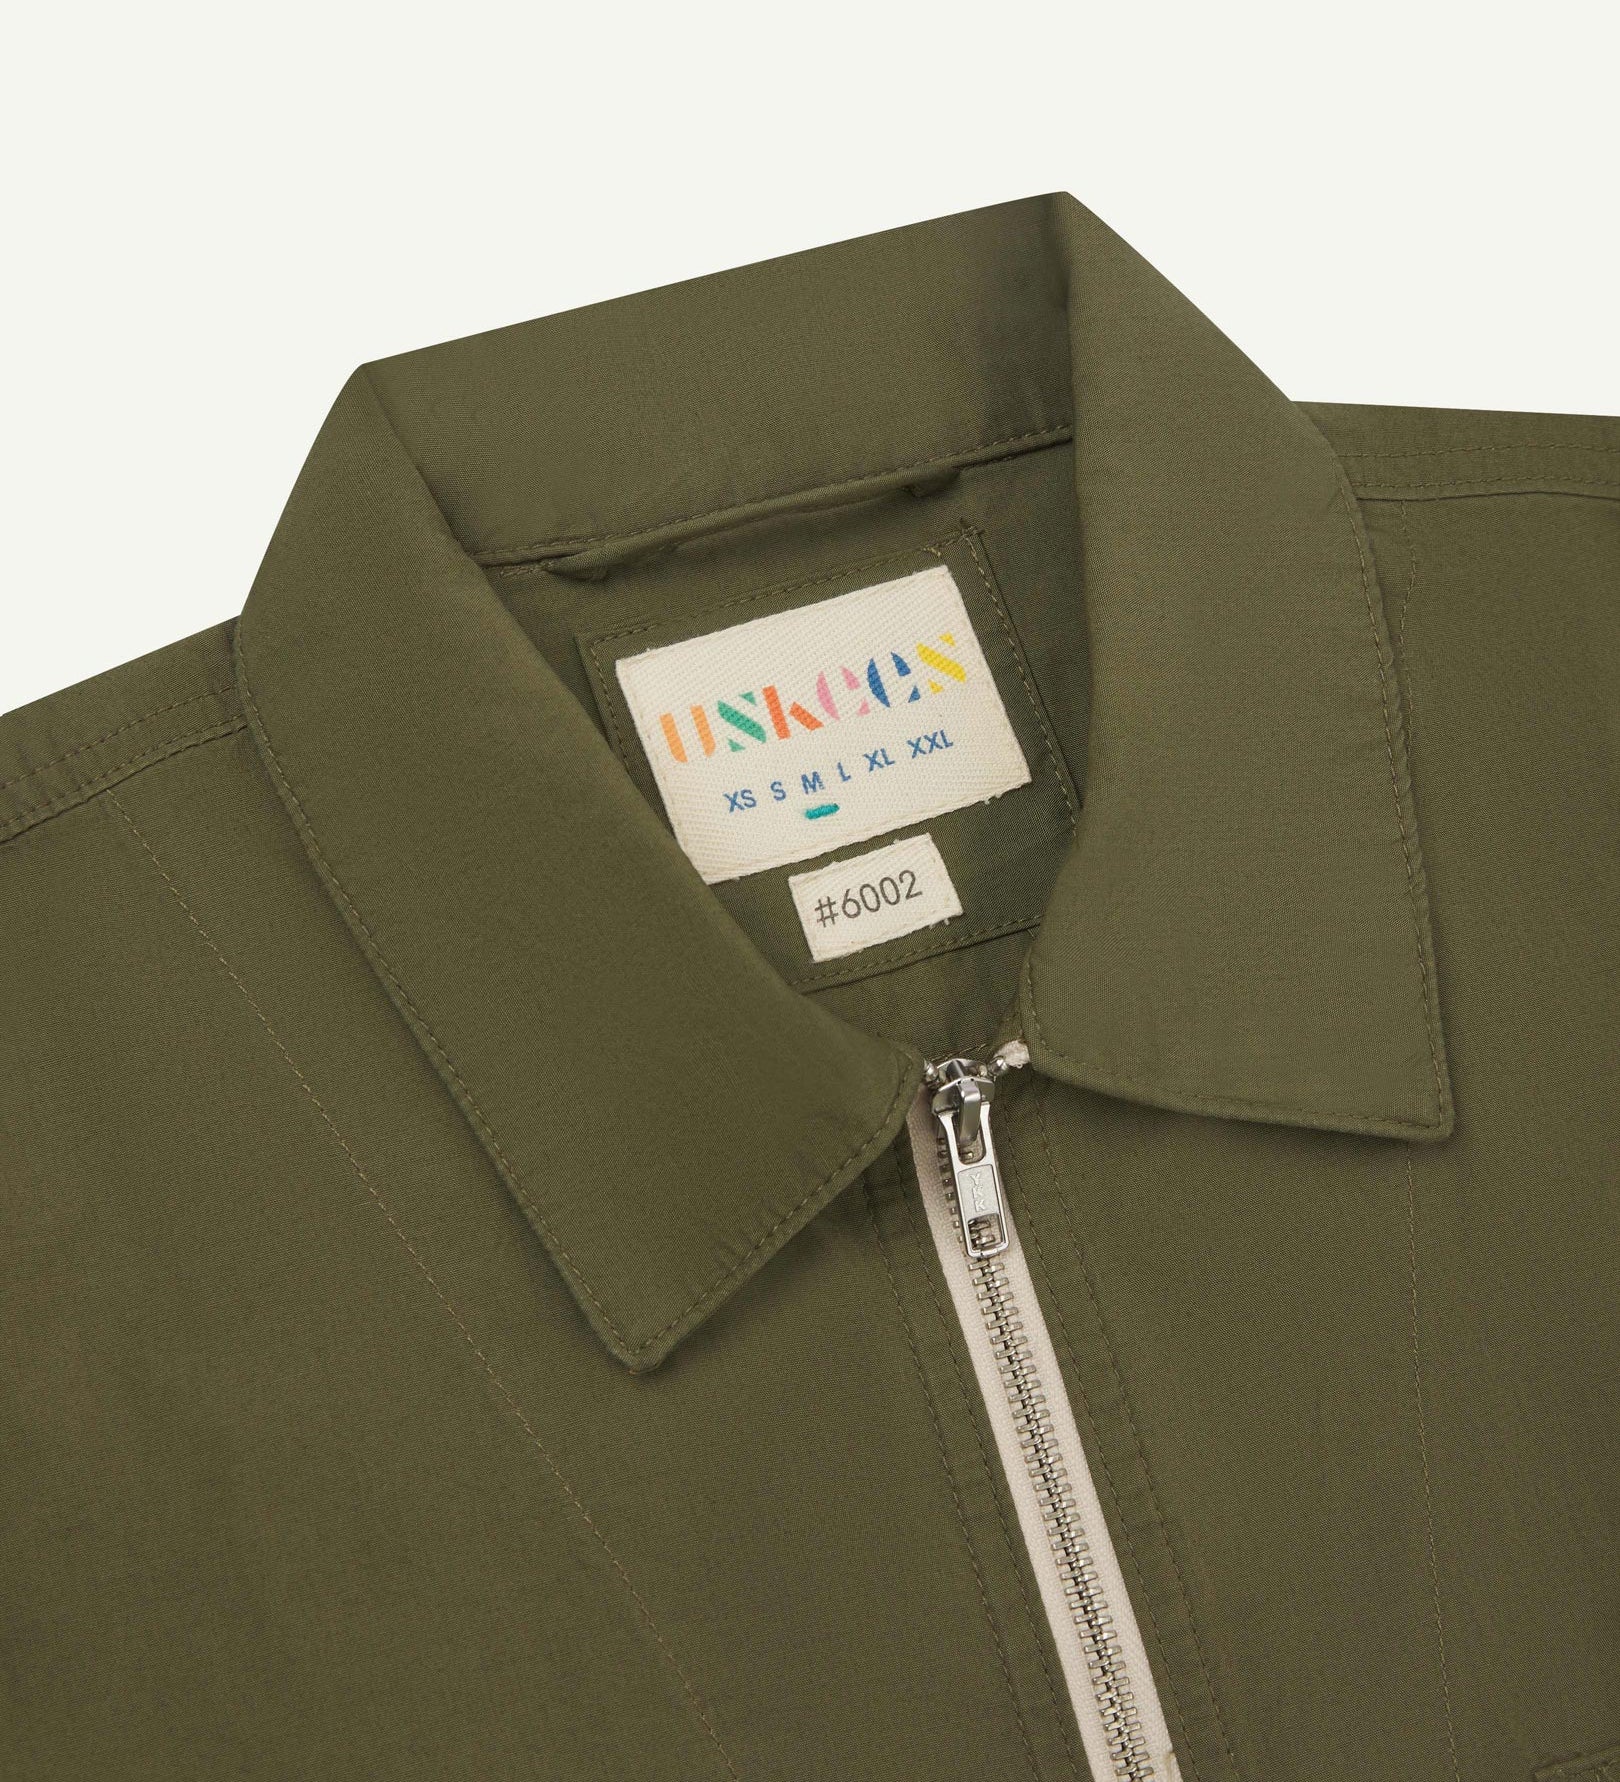 Front close-up view of the collar, zip detail and Uskees branding label of the olive-green 6002 lightweight jacket.